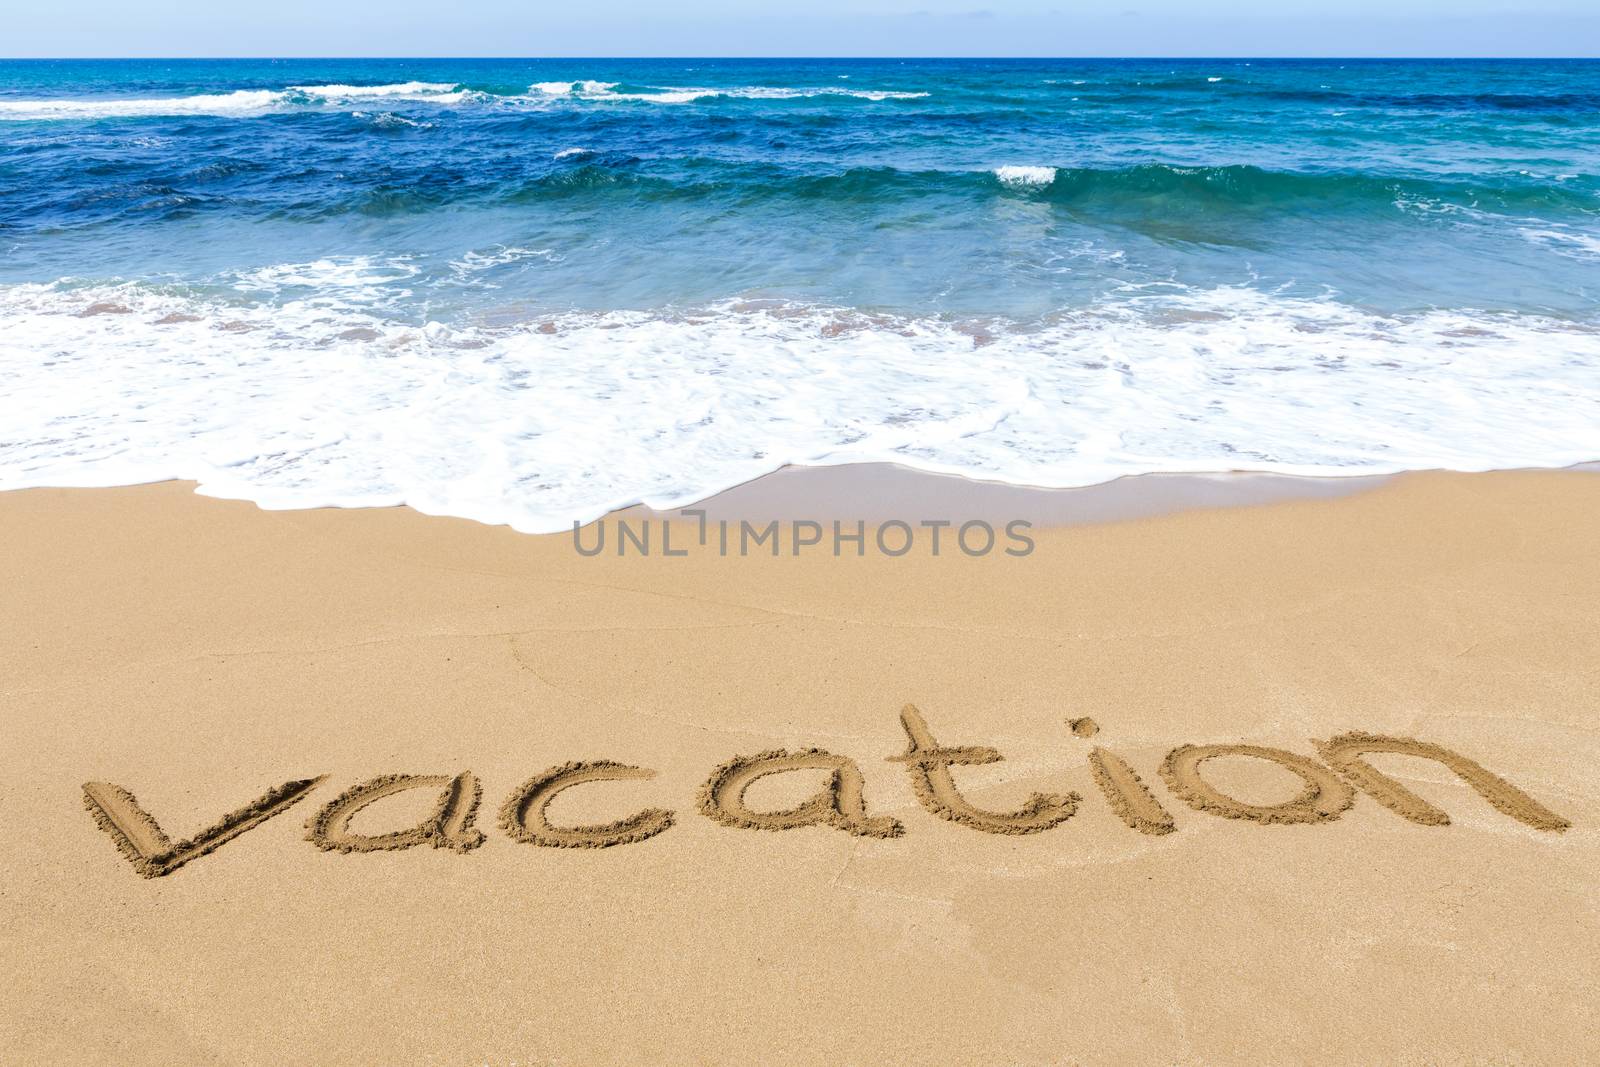 Word vacation written in sandy beach at coast with blue sea and waves